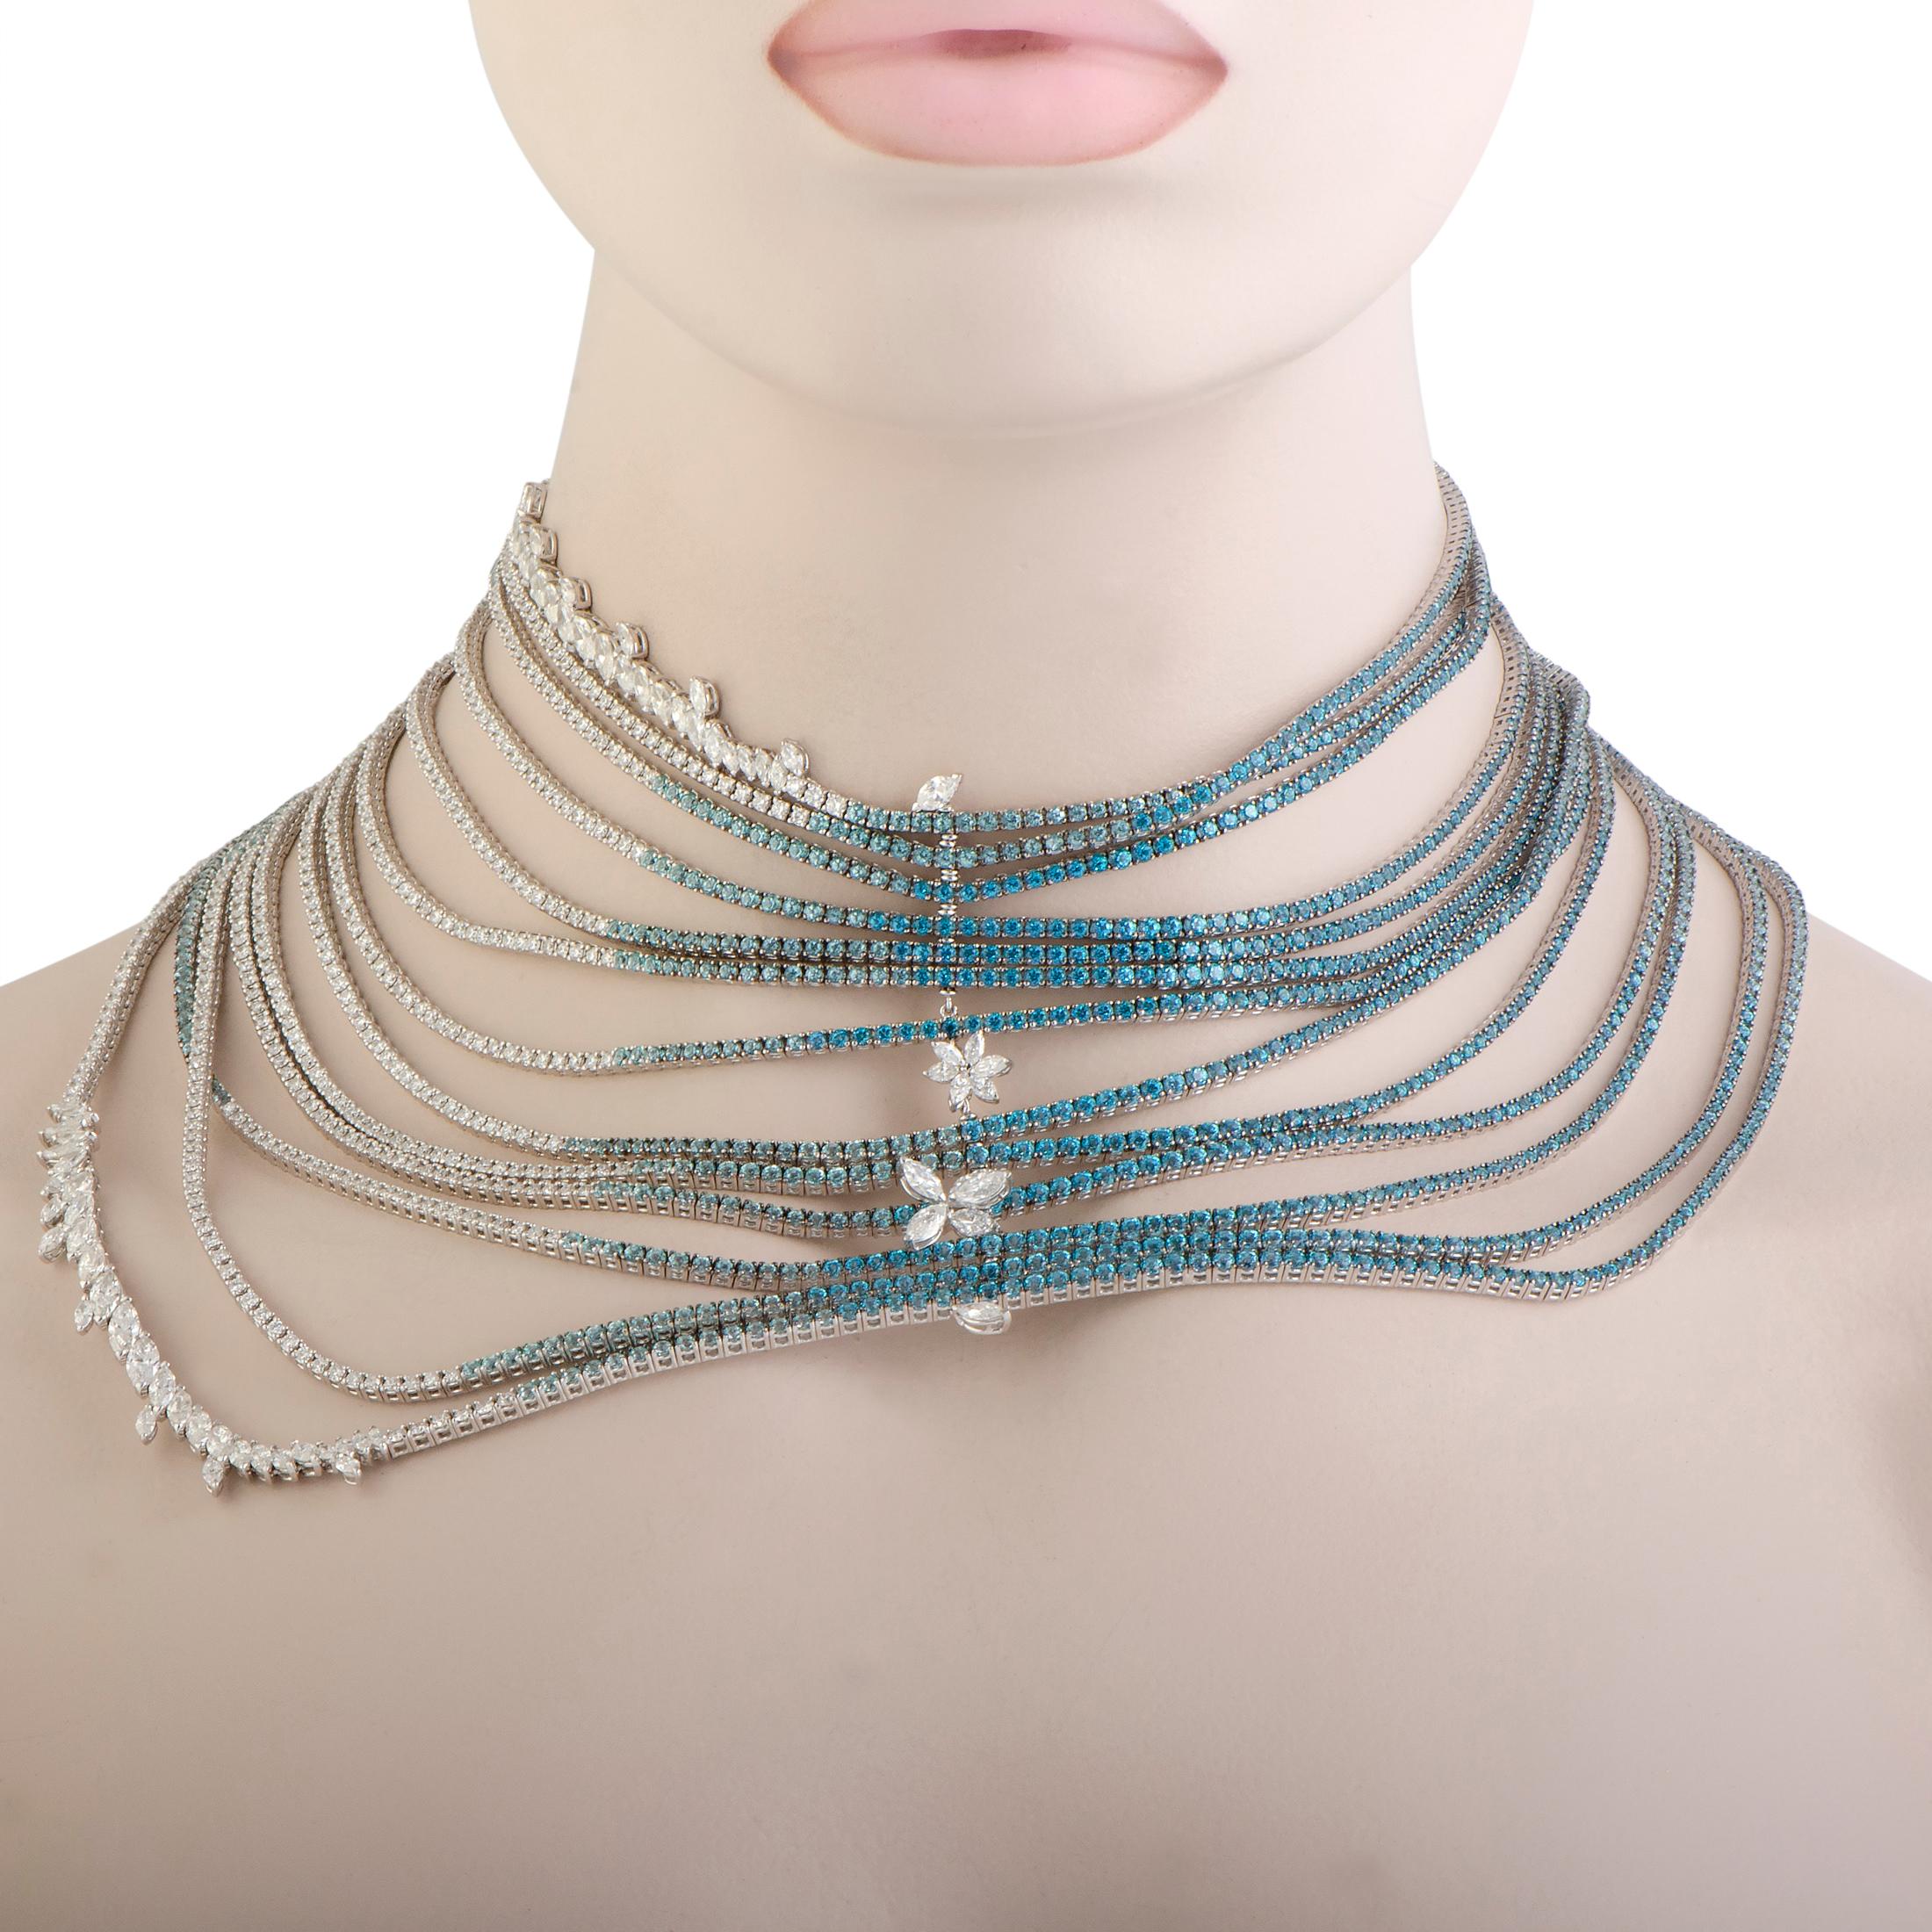 A piece of such aesthetic value that is so rarely seen even in the world of high-end jewelry, this extraordinary necklace will elevate your style in a most luxurious manner. The necklace is exquisitely designed by Stefan Hafner and it is crafted